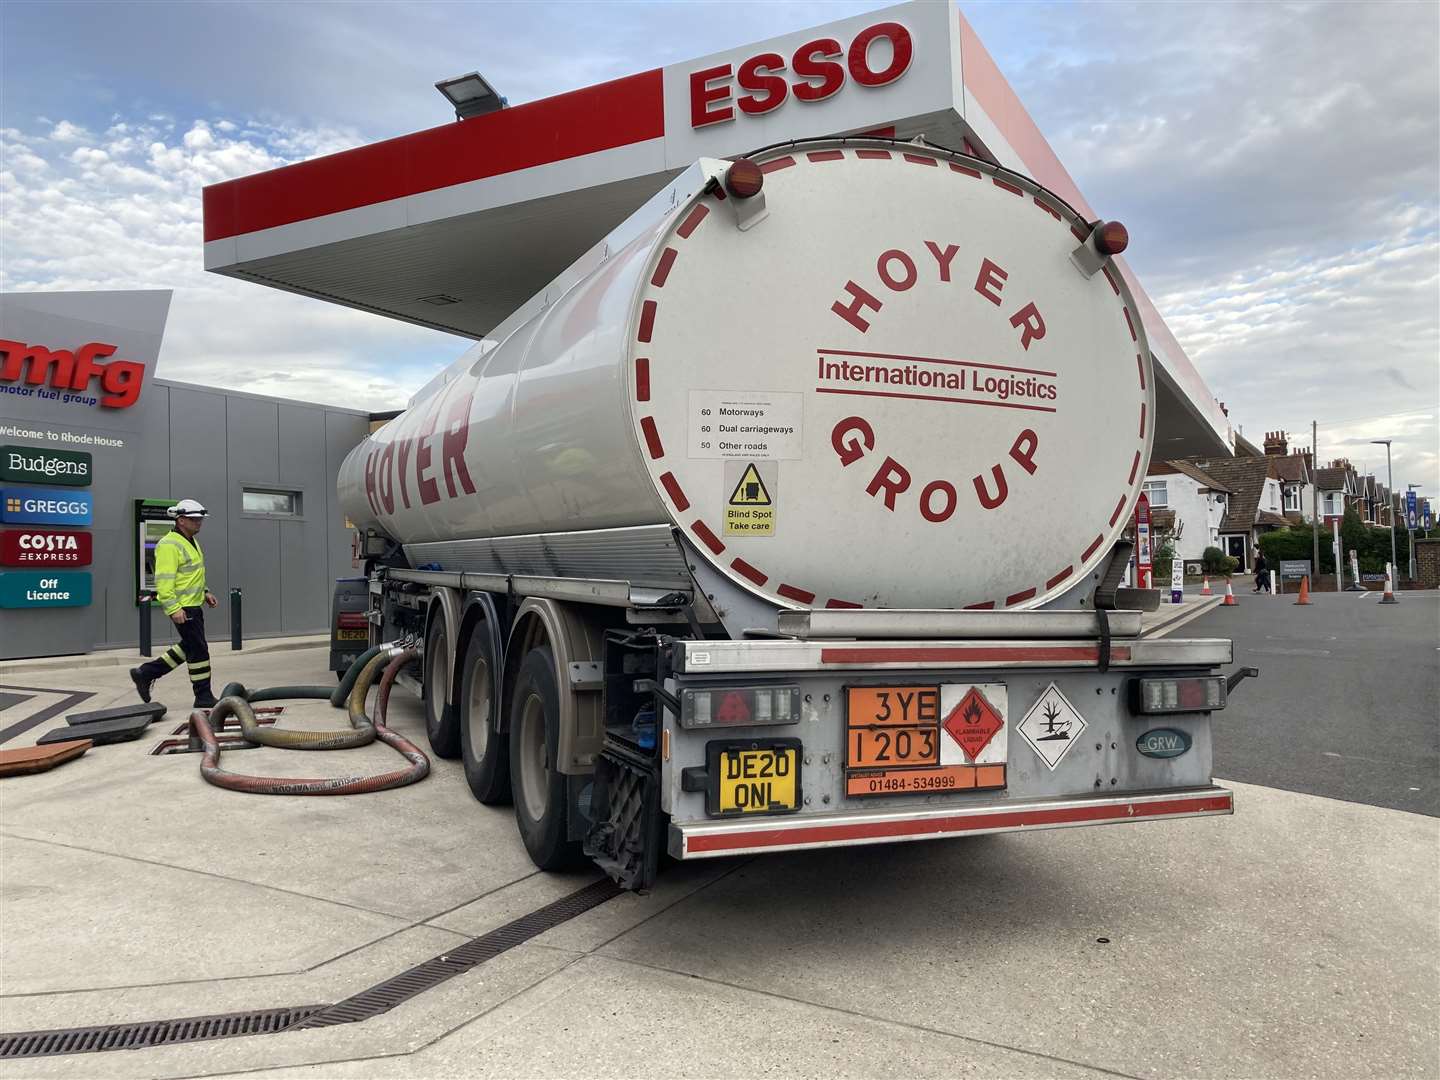 A fuel tanker arrives at the Esso garage on the A2 in Sittingbourne